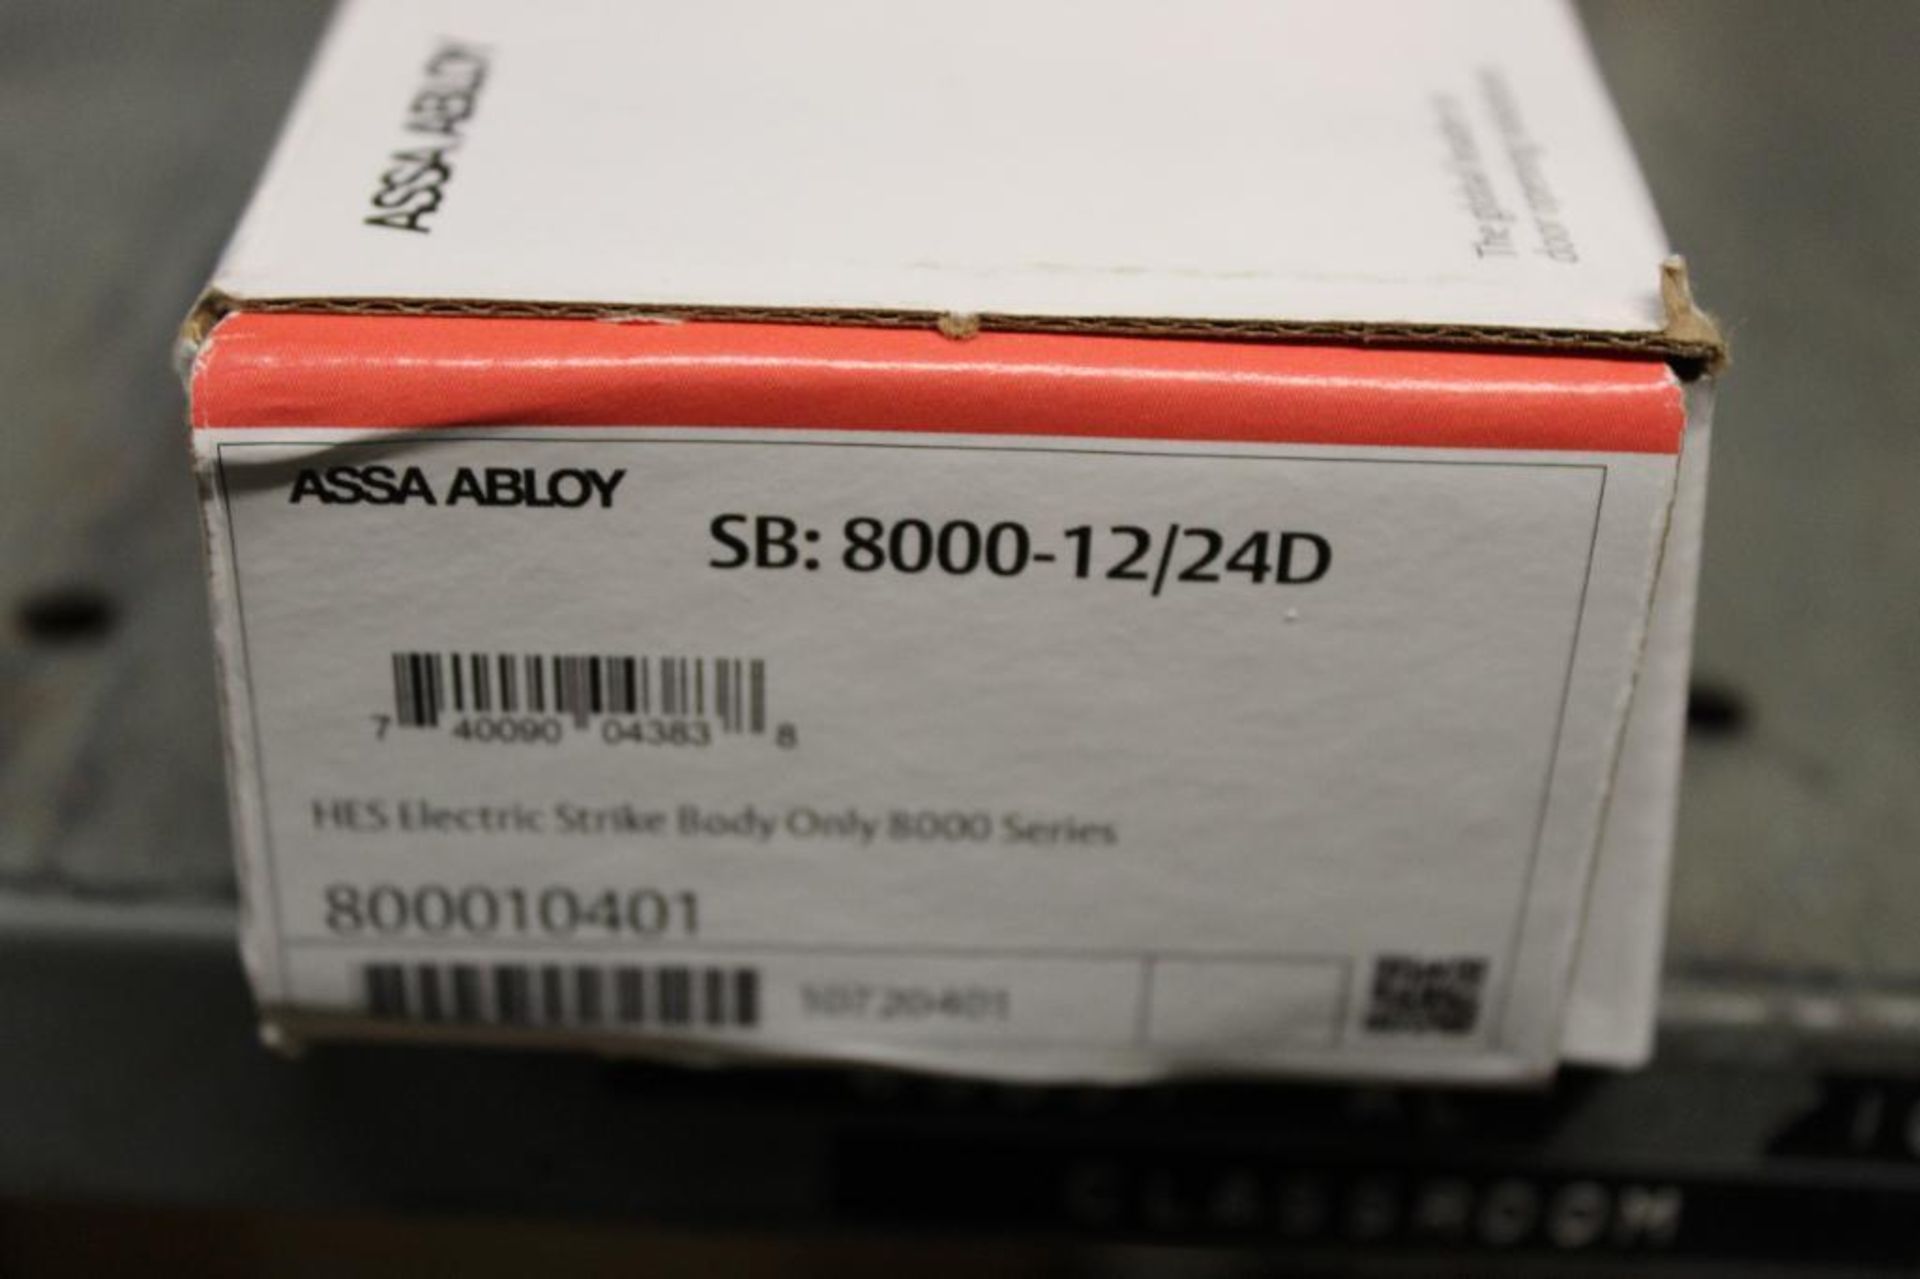 Lot of Assa Abloy HES Electric Strike Body 1006 Series &HES Complete Pac for Latchbolts 5000 Series - Image 13 of 15